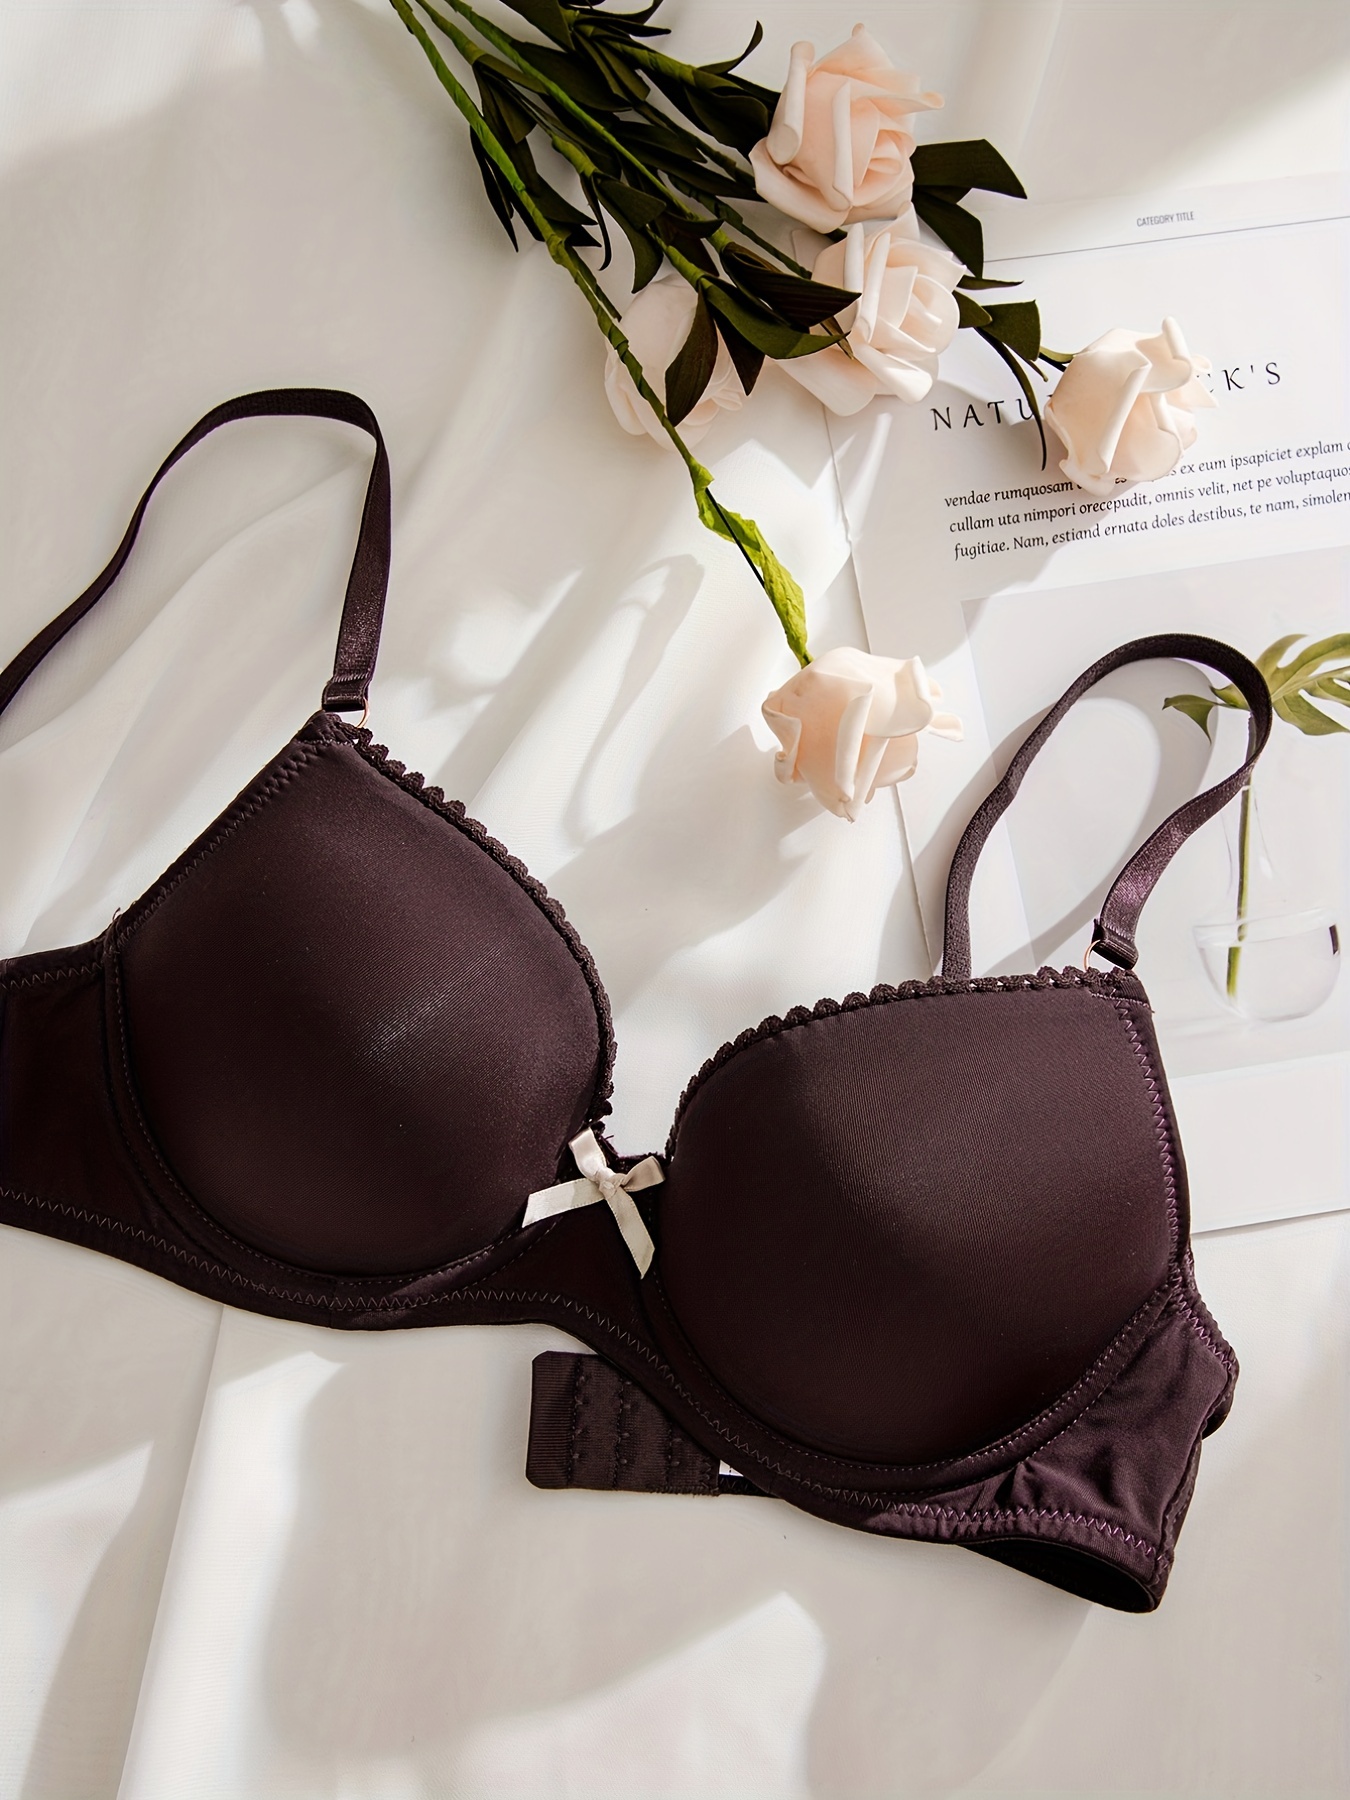 Simple Solid Push Up Bra, Comfy & Breathable Everyday Bra, Women's Lingerie  & Underwear